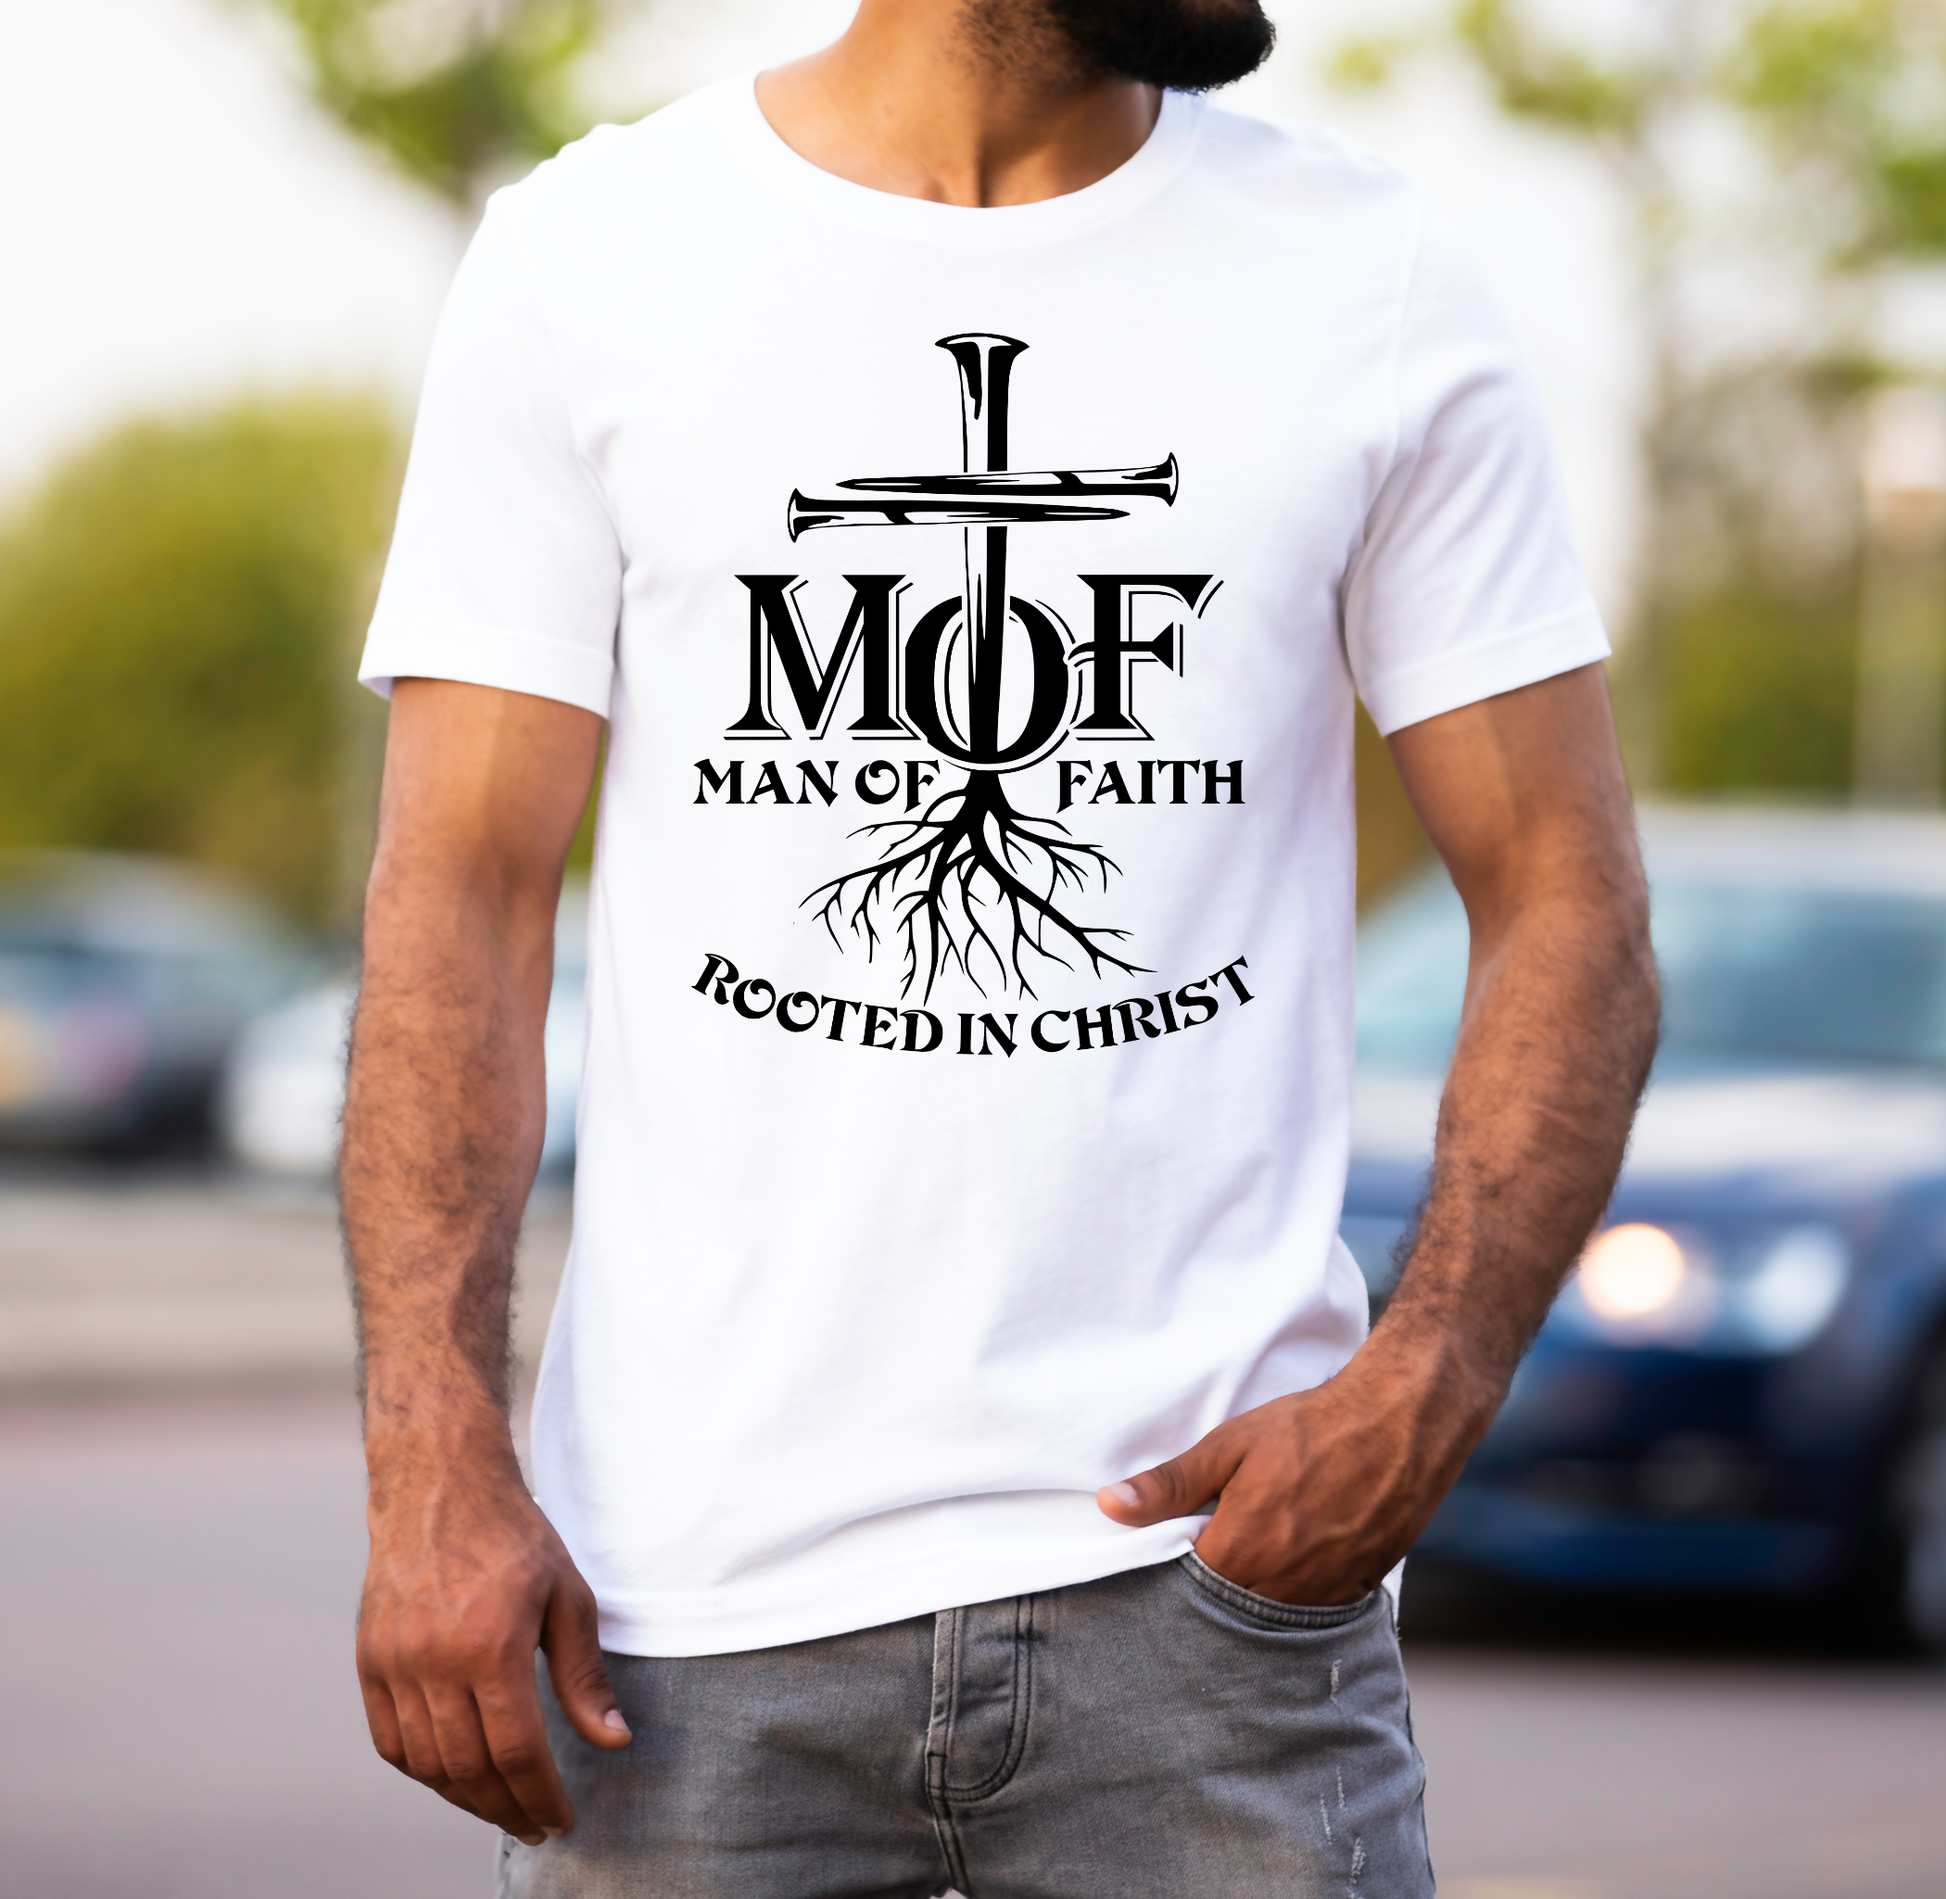 Man of faith Rooted in Christ T-shirt Custom Tshirt Bambi Rae Collections   